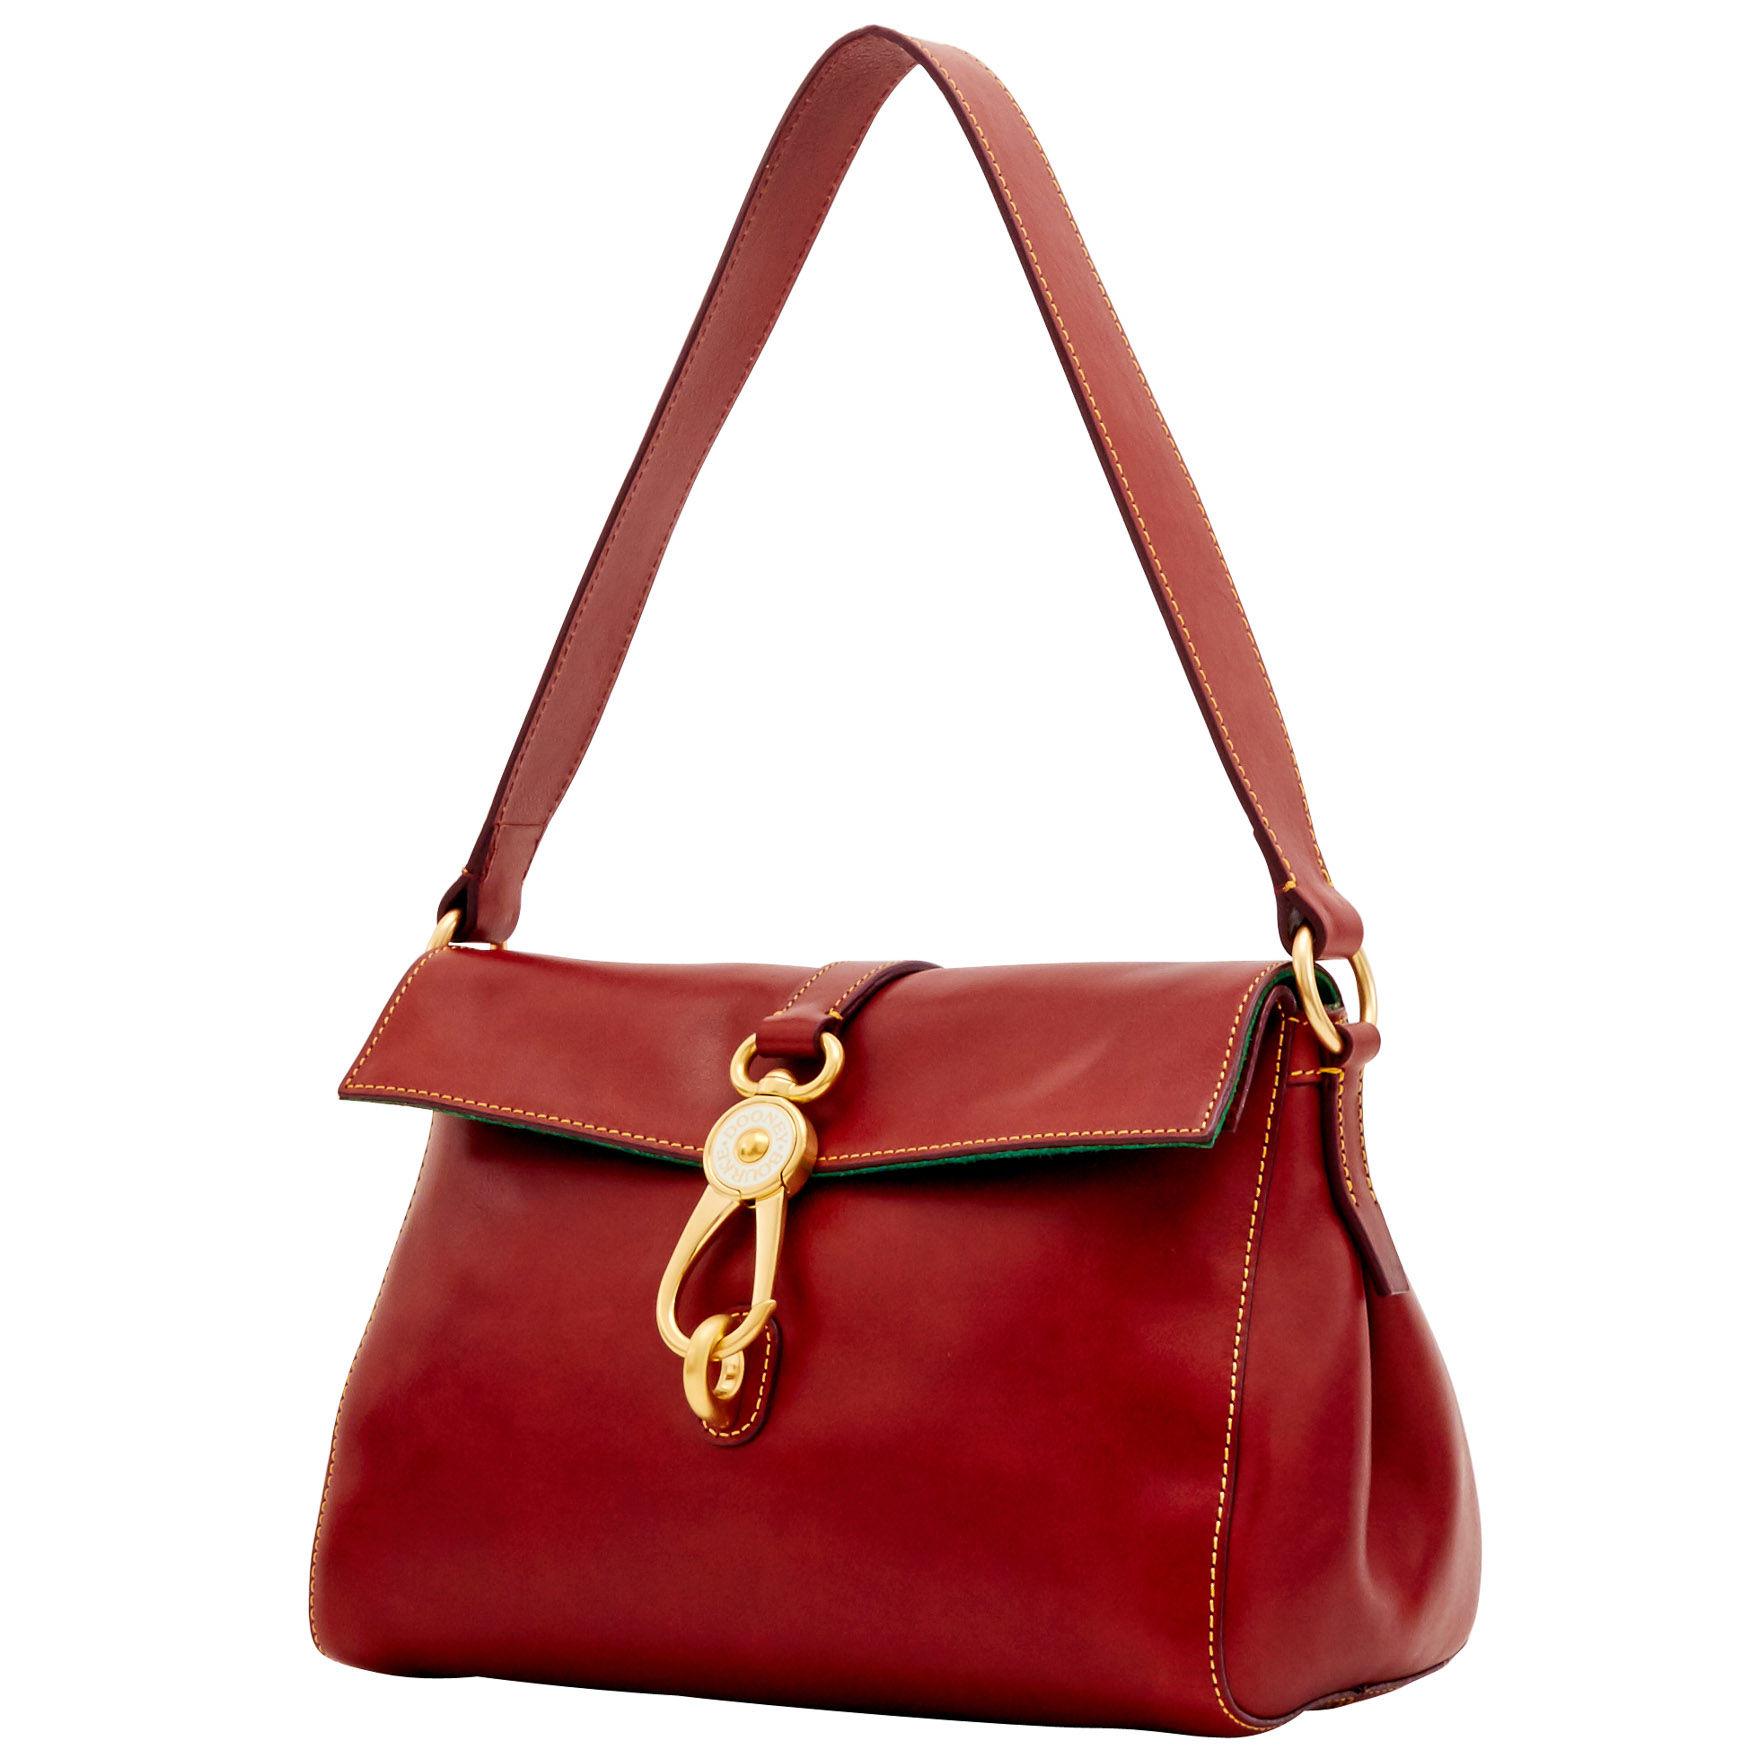 Dooney & Bourke Leather Florentine Libby Hobo in Natural (Red) - Lyst